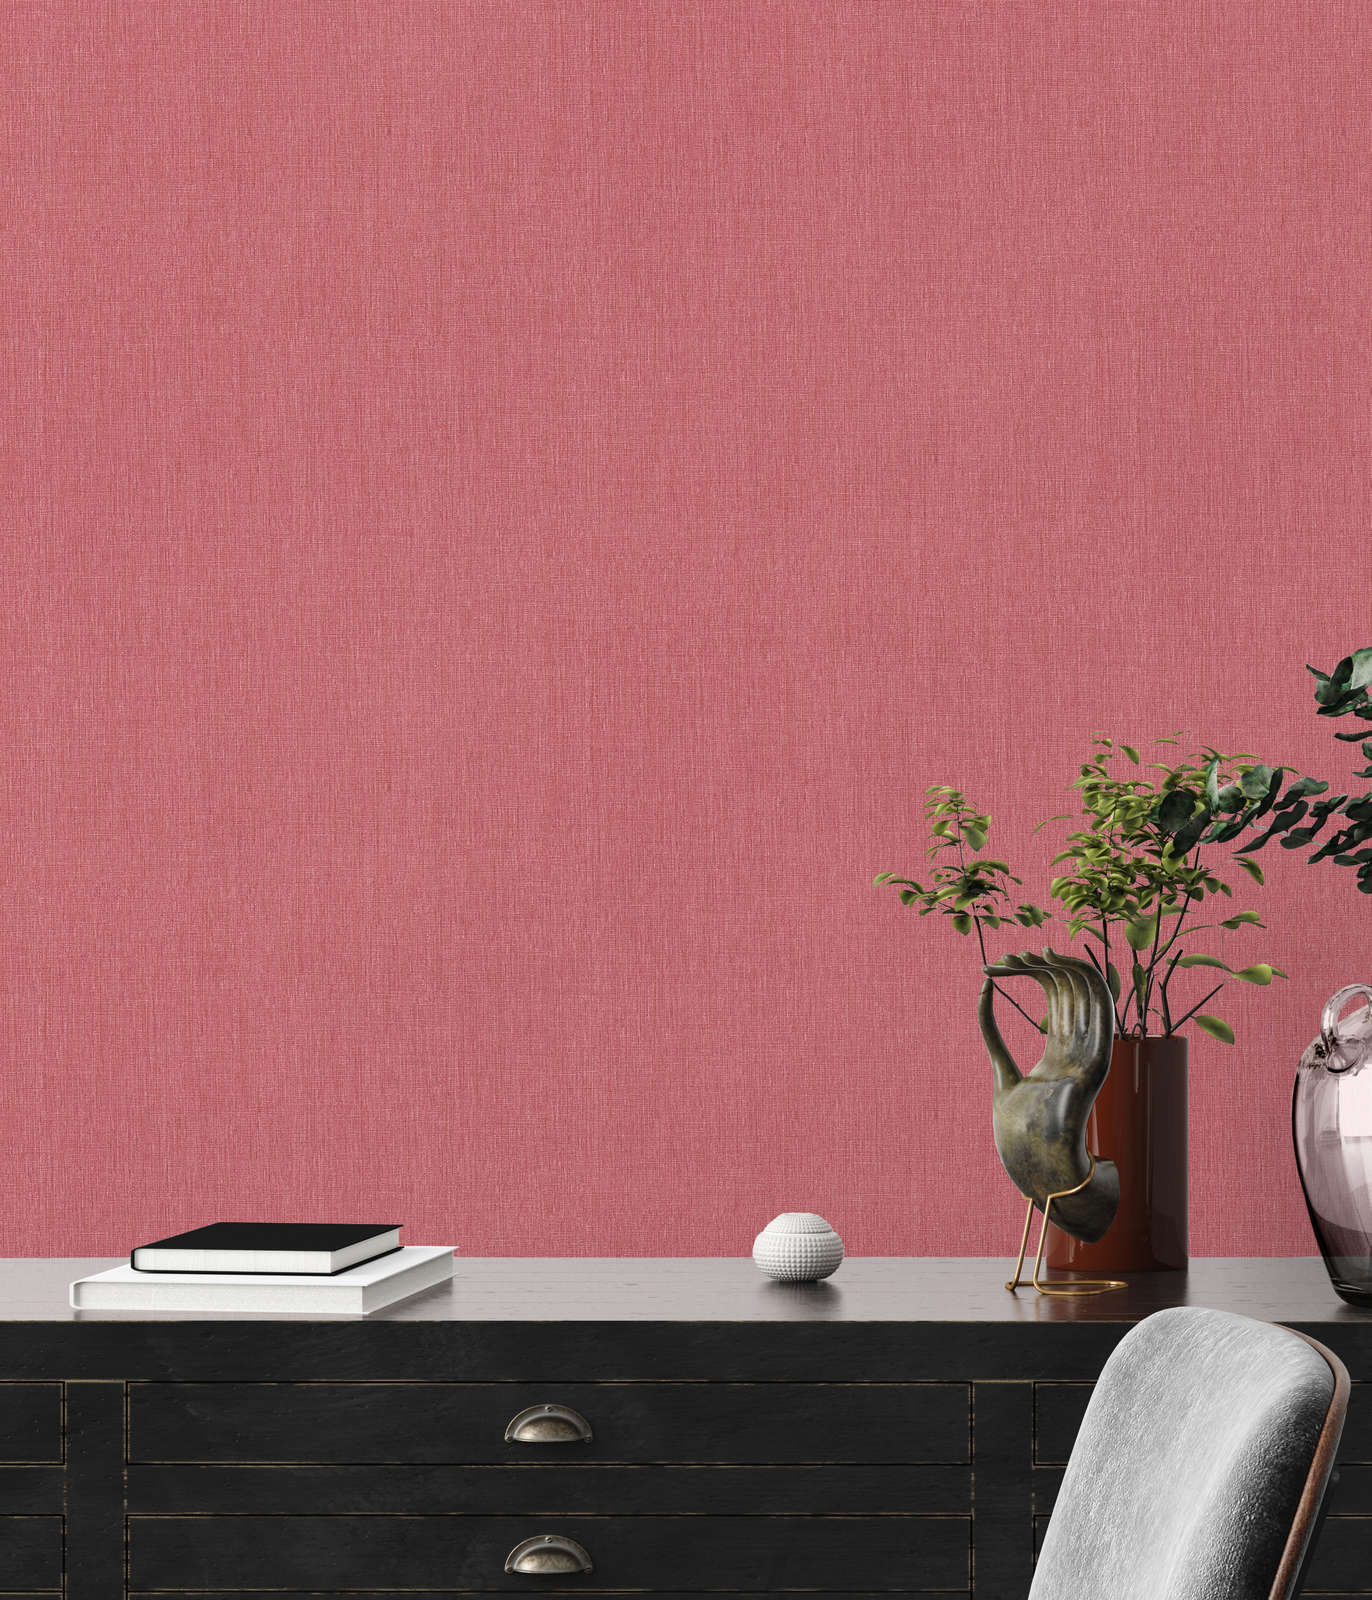             Non-woven wallpaper in one colour with textile look in matt finish - red
        